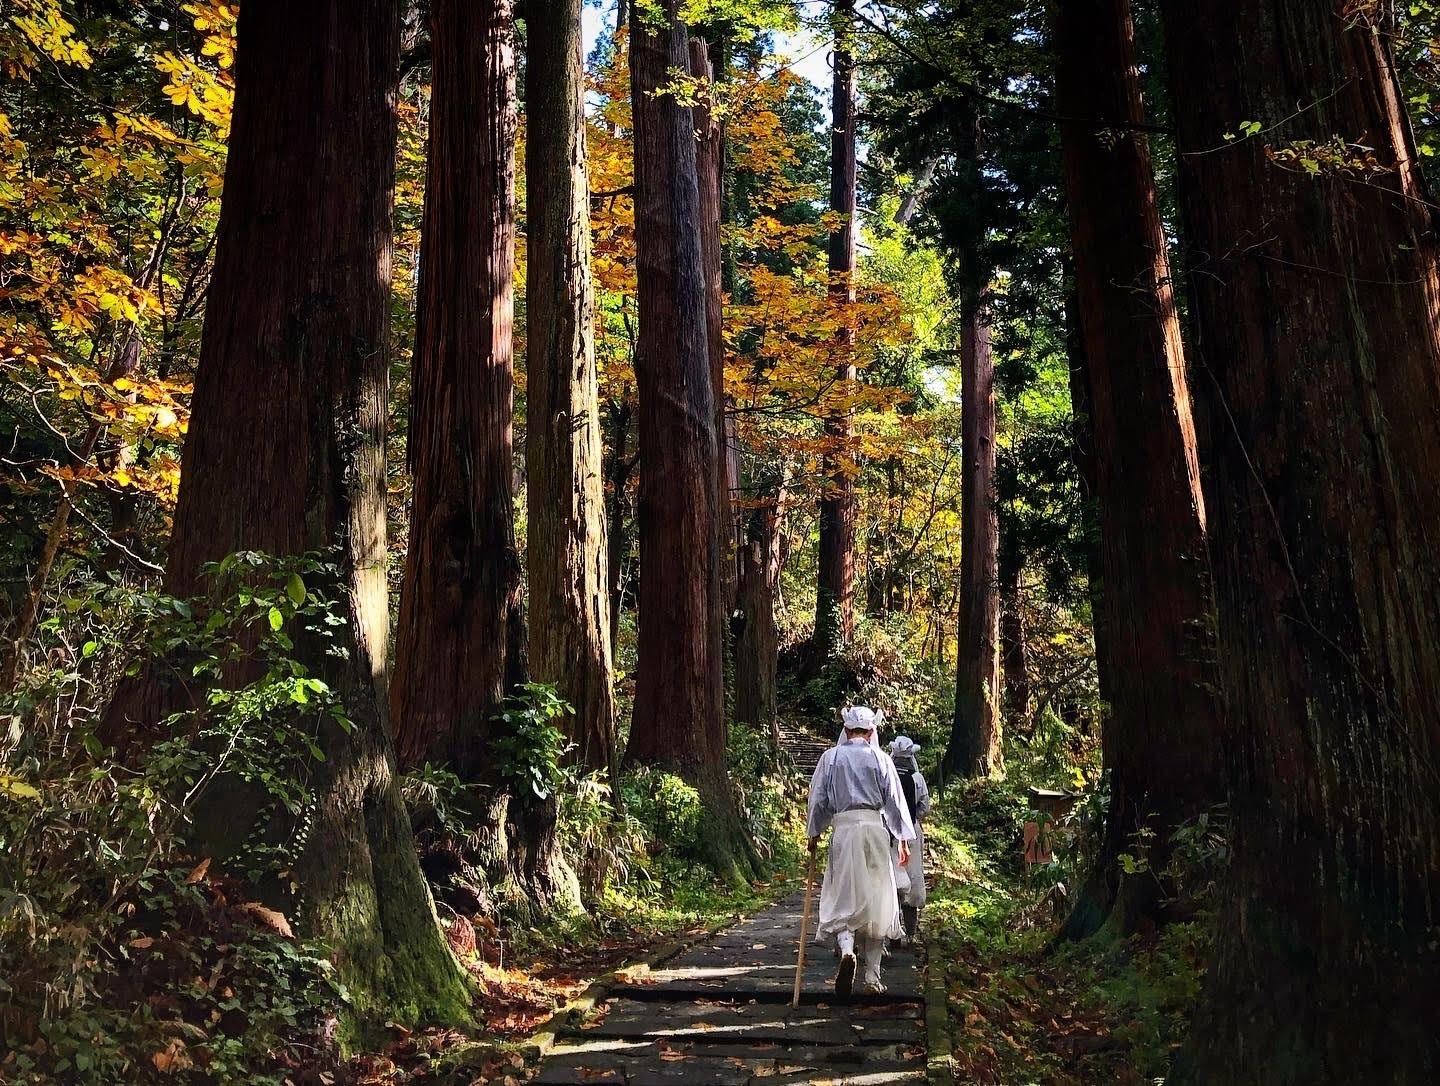 Yamabushi dressed in ceremonial white shiroshozoku robes walk on the stone stairway amongst the sprawling cedar forest of Haguro-san with a canopy of yellow autumn leaves.